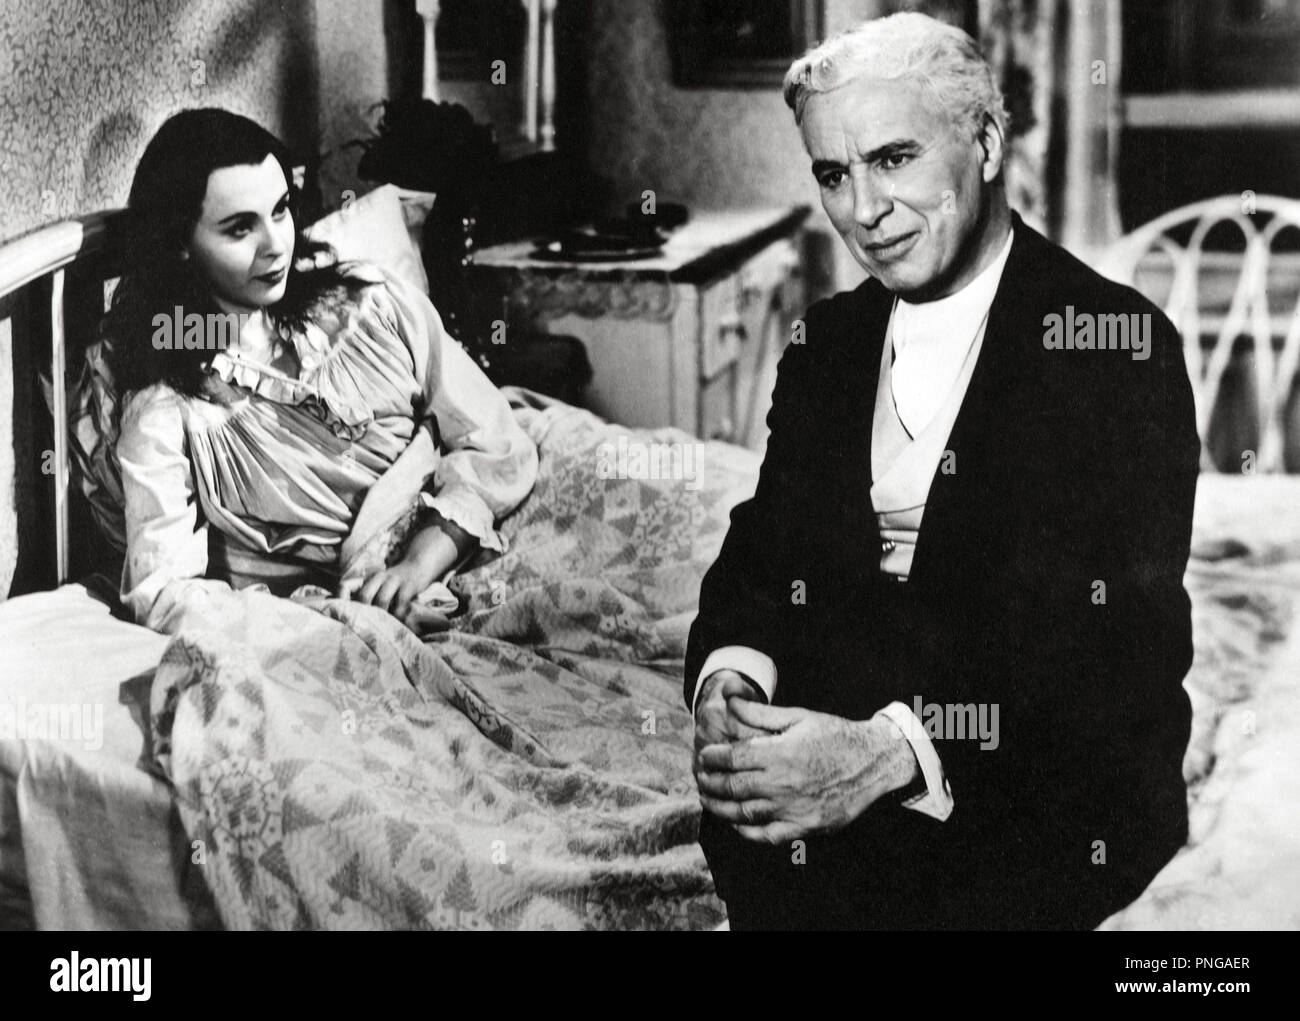 Original film title: LIMELIGHT. English title: LIMELIGHT. Year: 1952.  Director: CHARLIE CHAPLIN. Stars: CHARLIE CHAPLIN; CLAIRE BLOOM. Credit:  UNITED ARTISTS / Album Stock Photo - Alamy